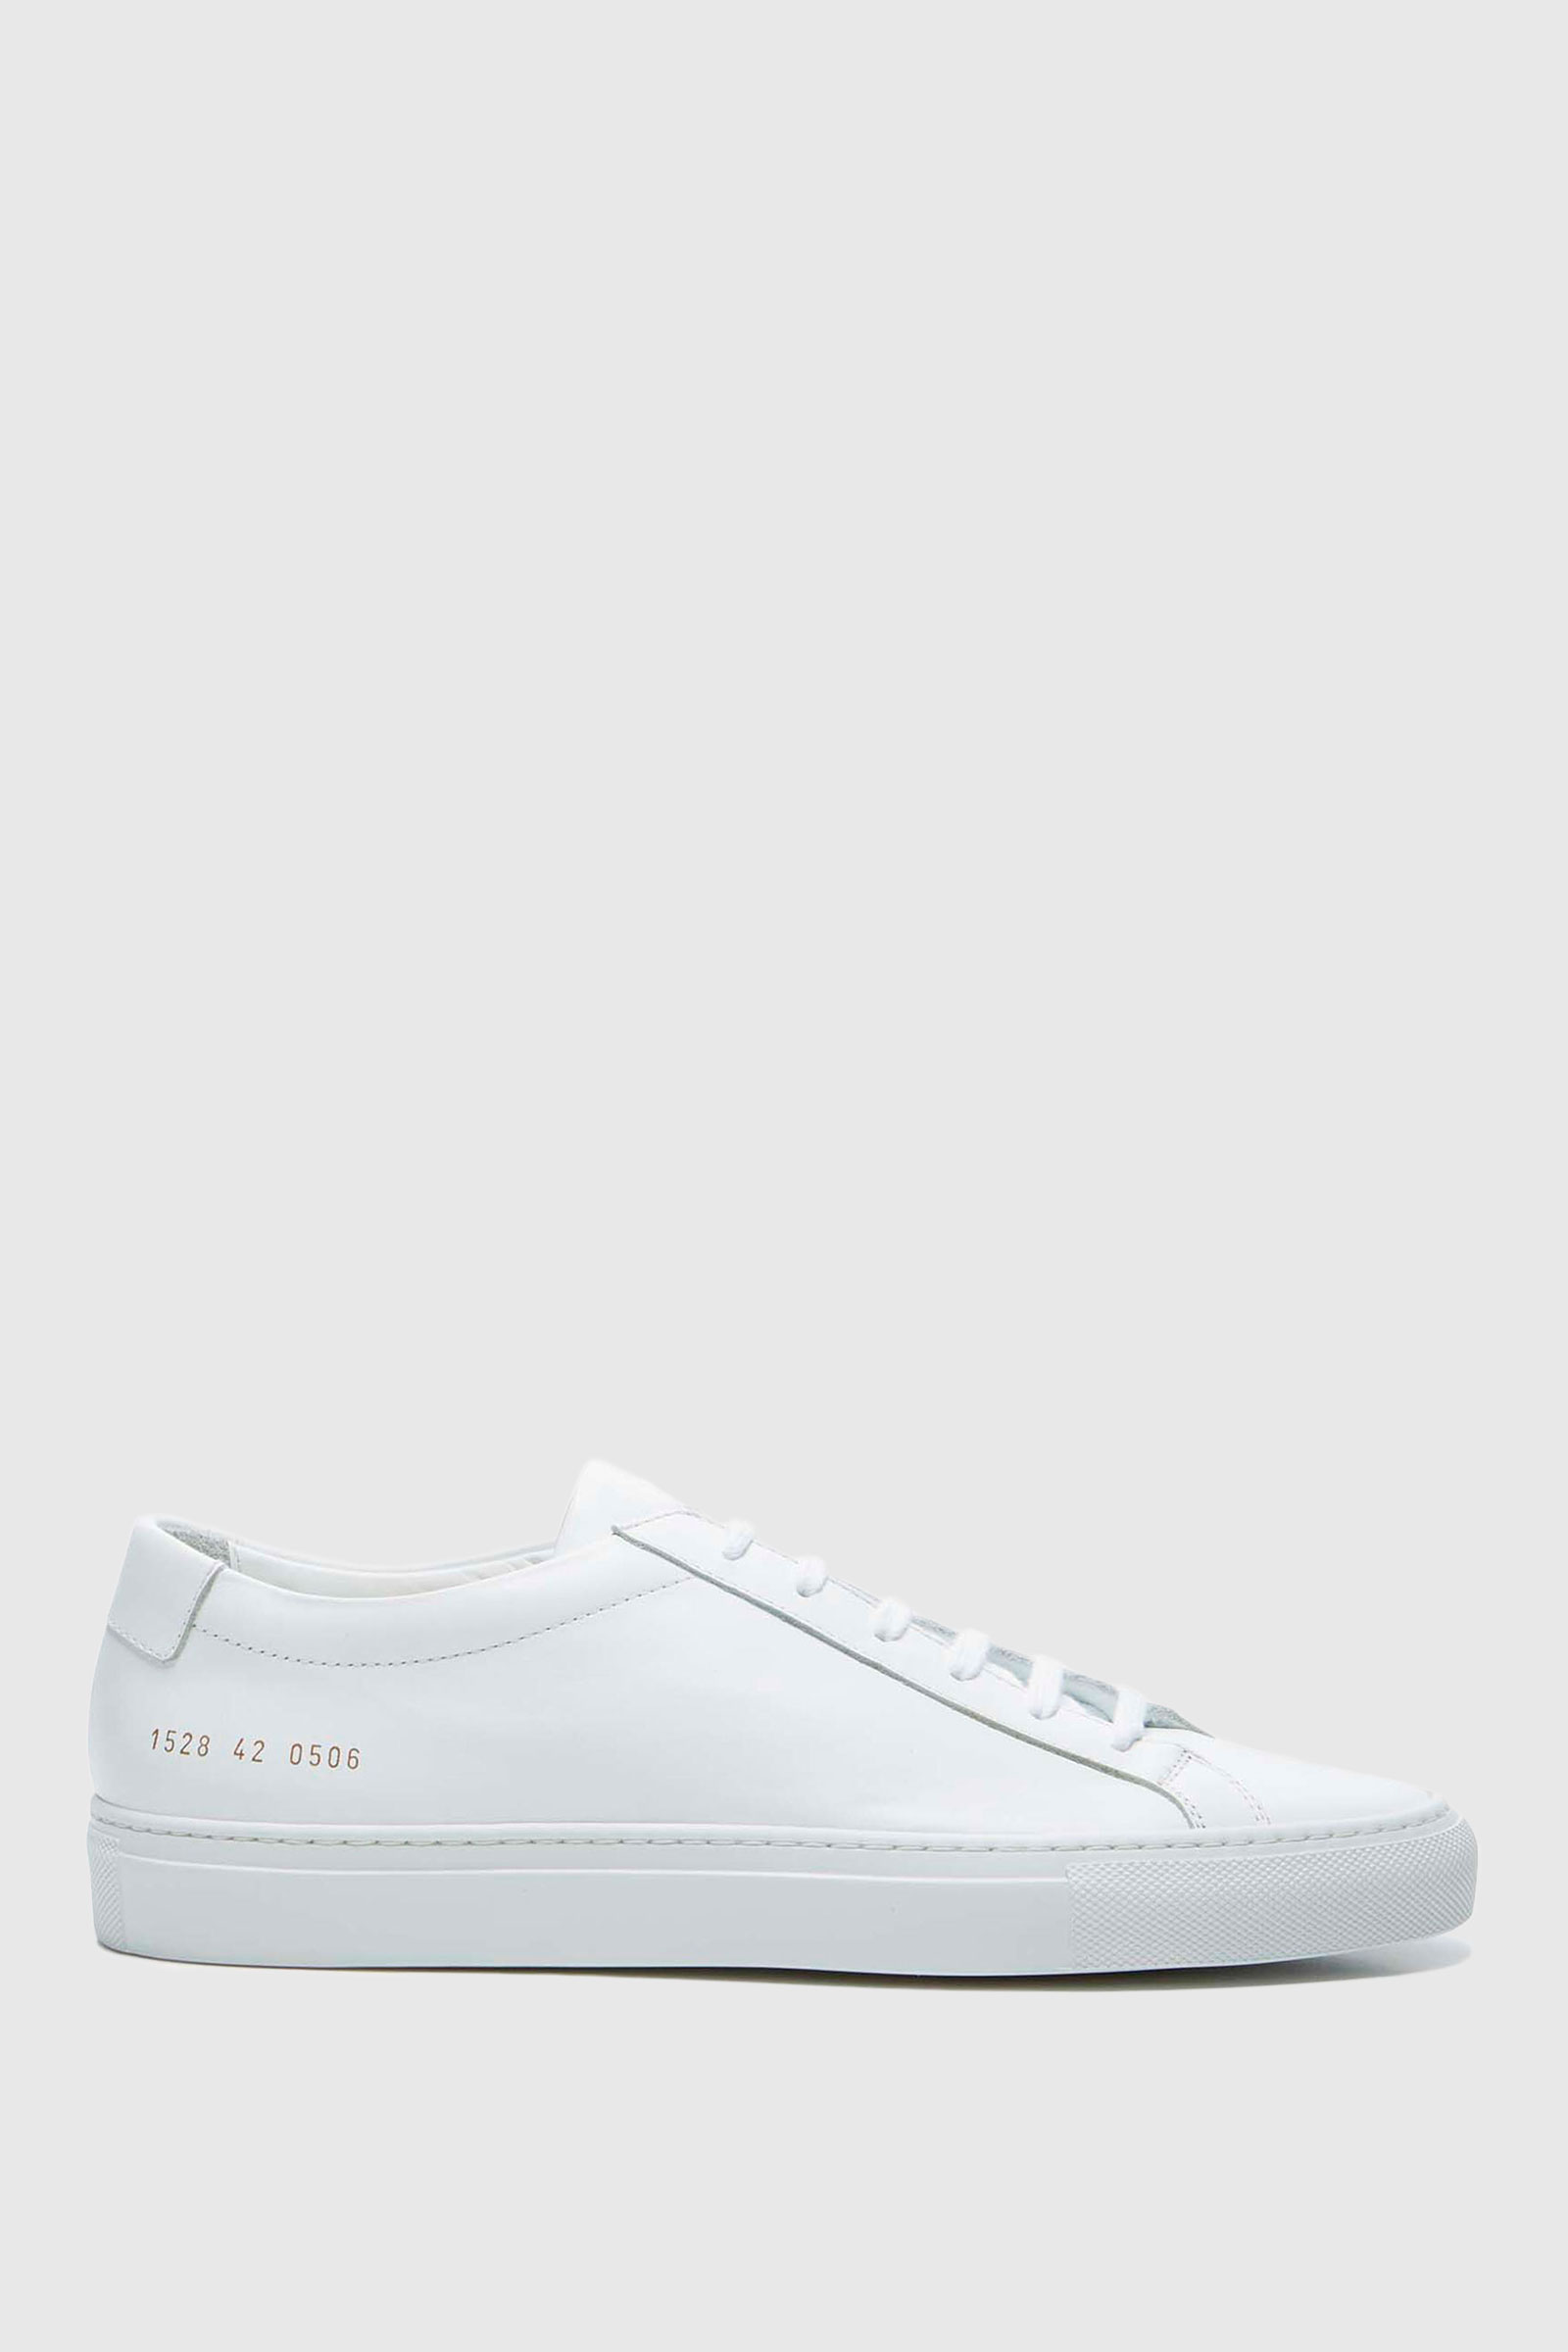 common projects achilles low worth it